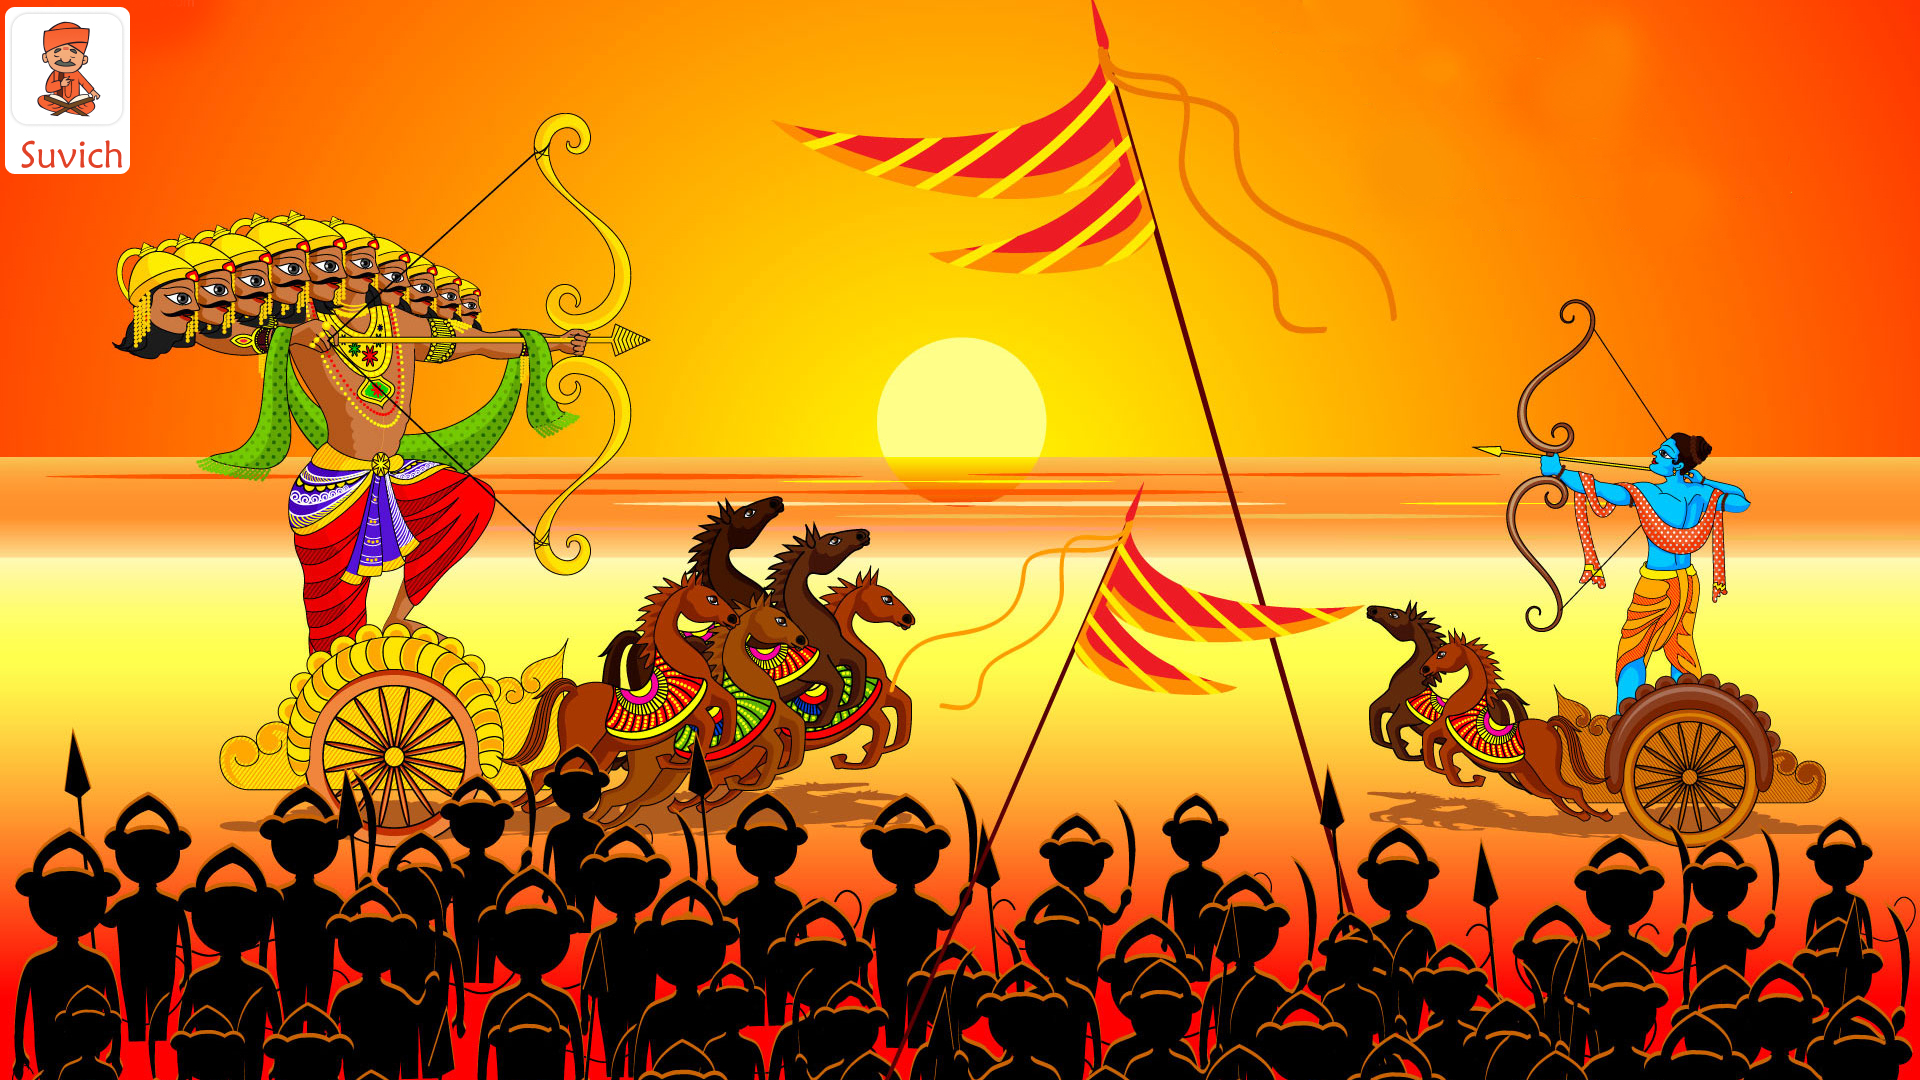 Dussehra 2021: Know The Its Effects, History And Celebration